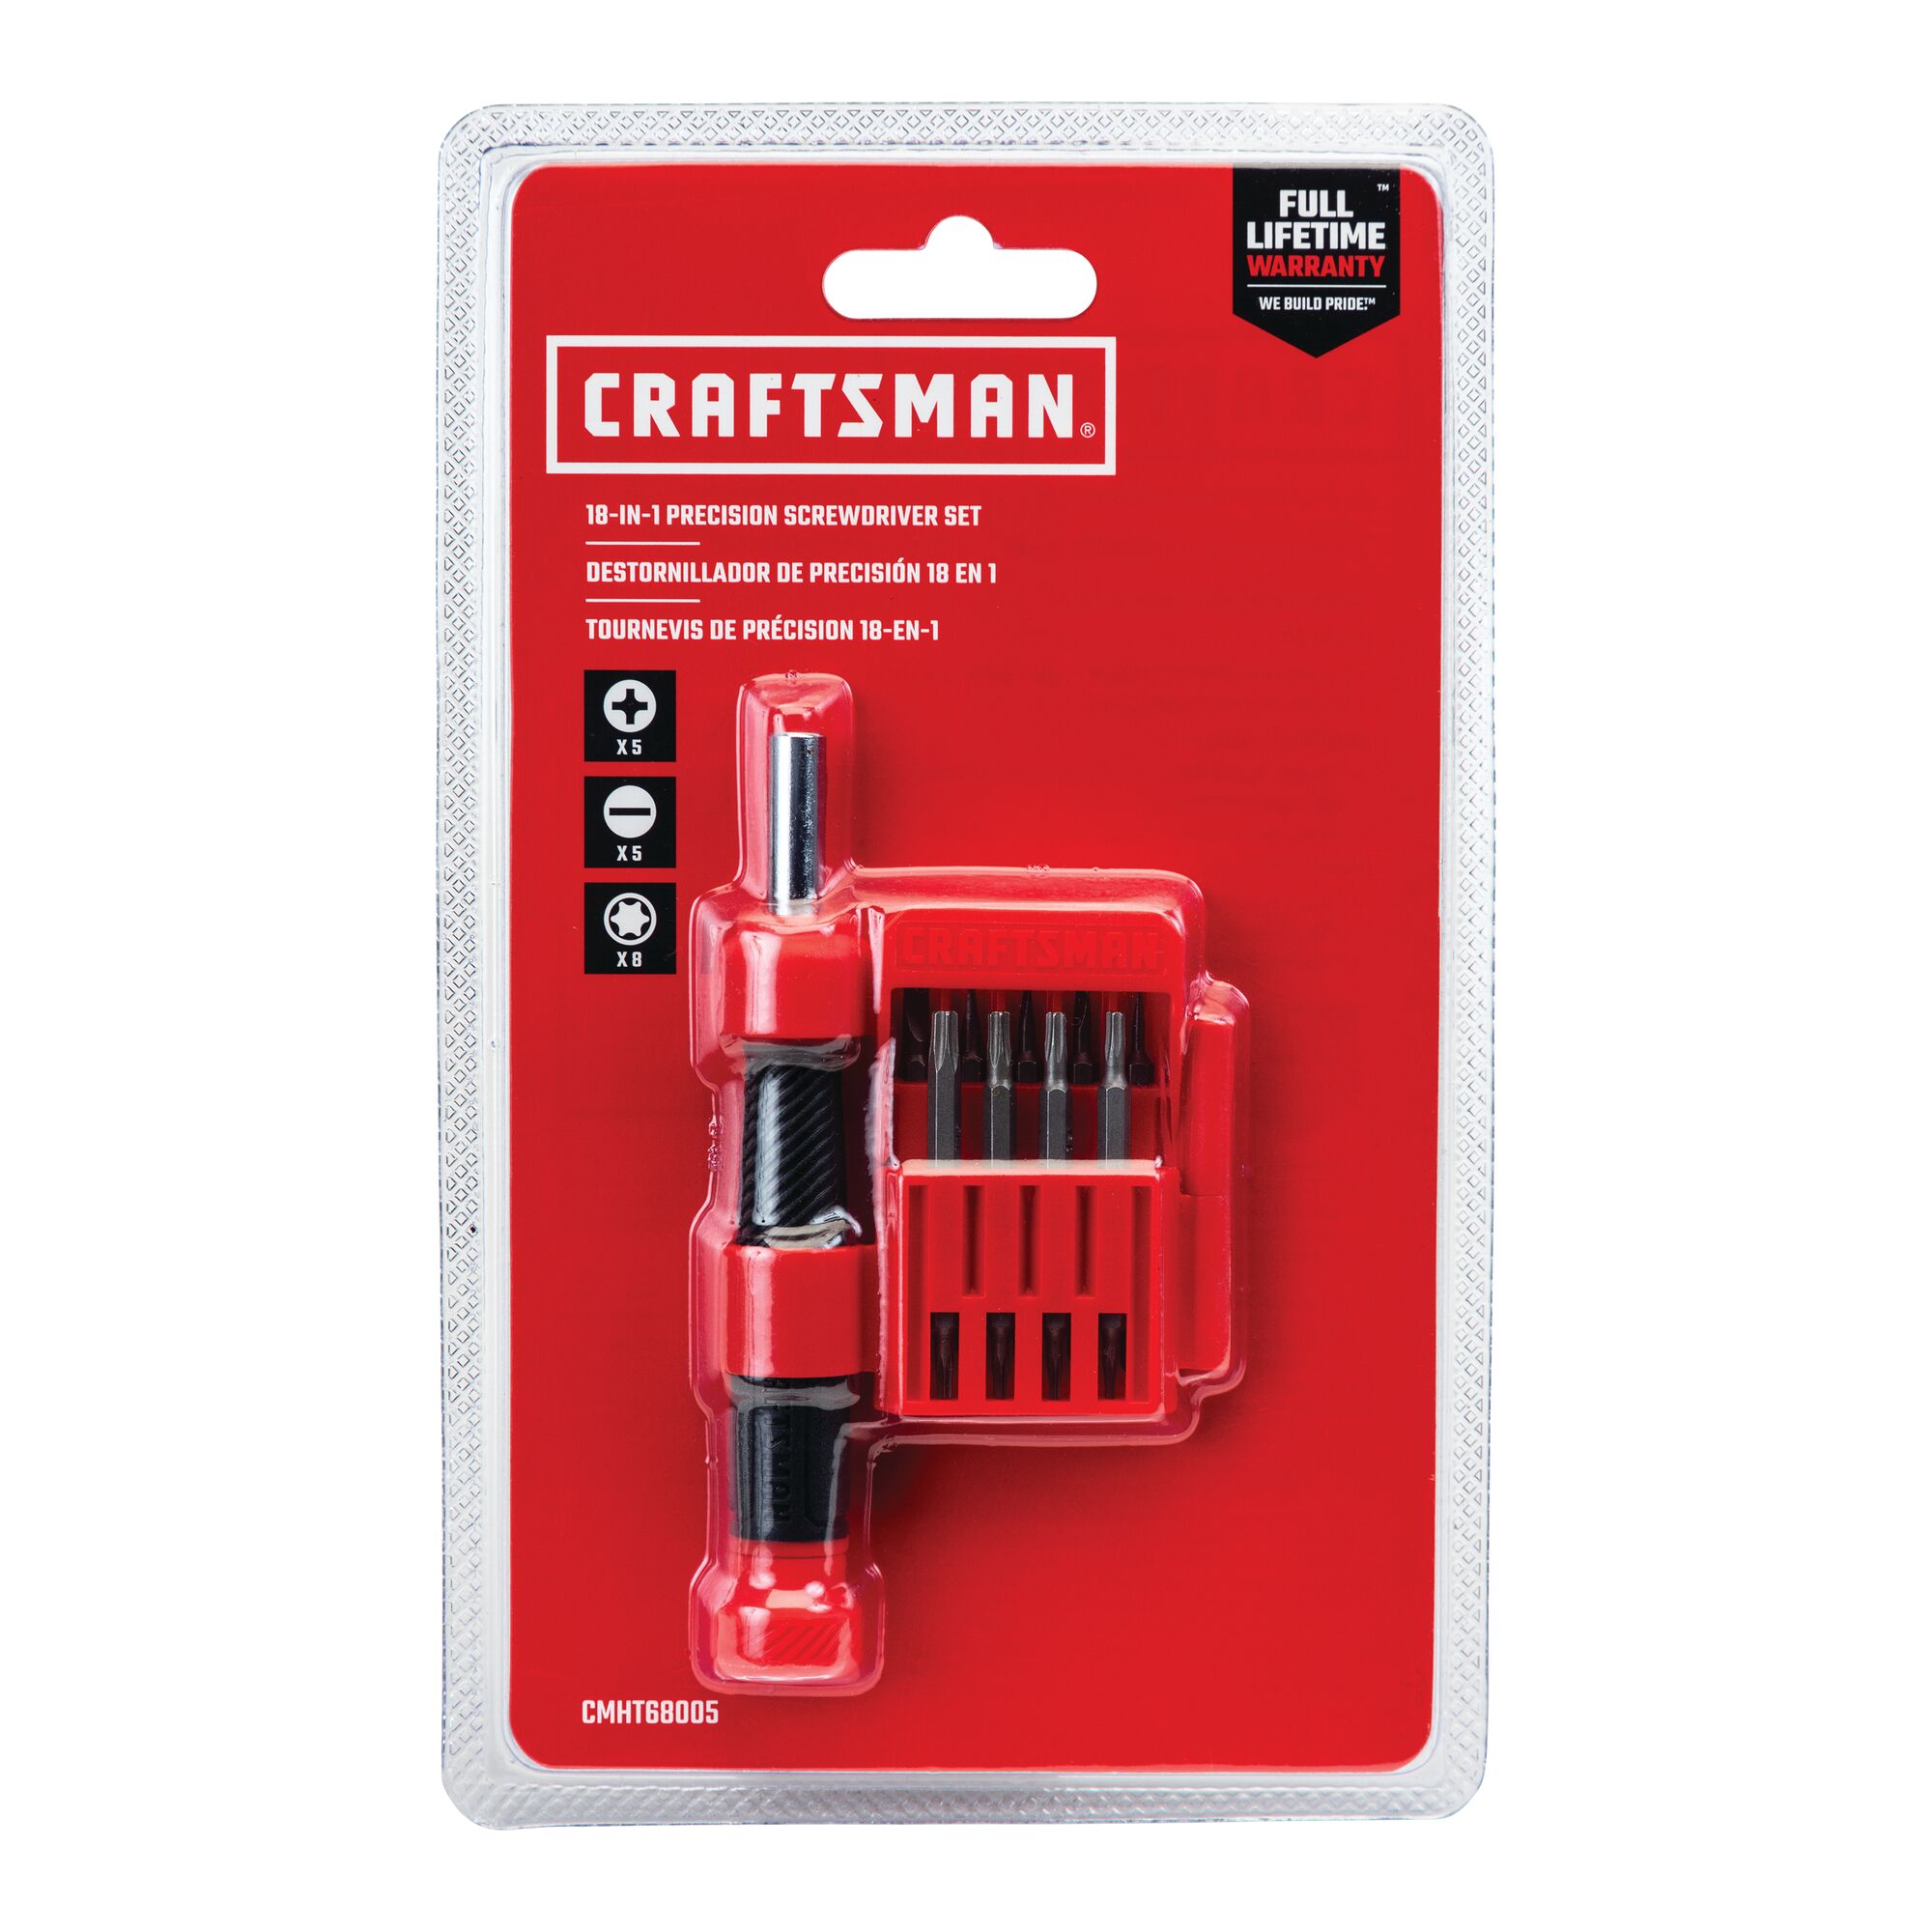 18 piece Precision Multi Bit ScrewDriver Set in carded blister packaging.